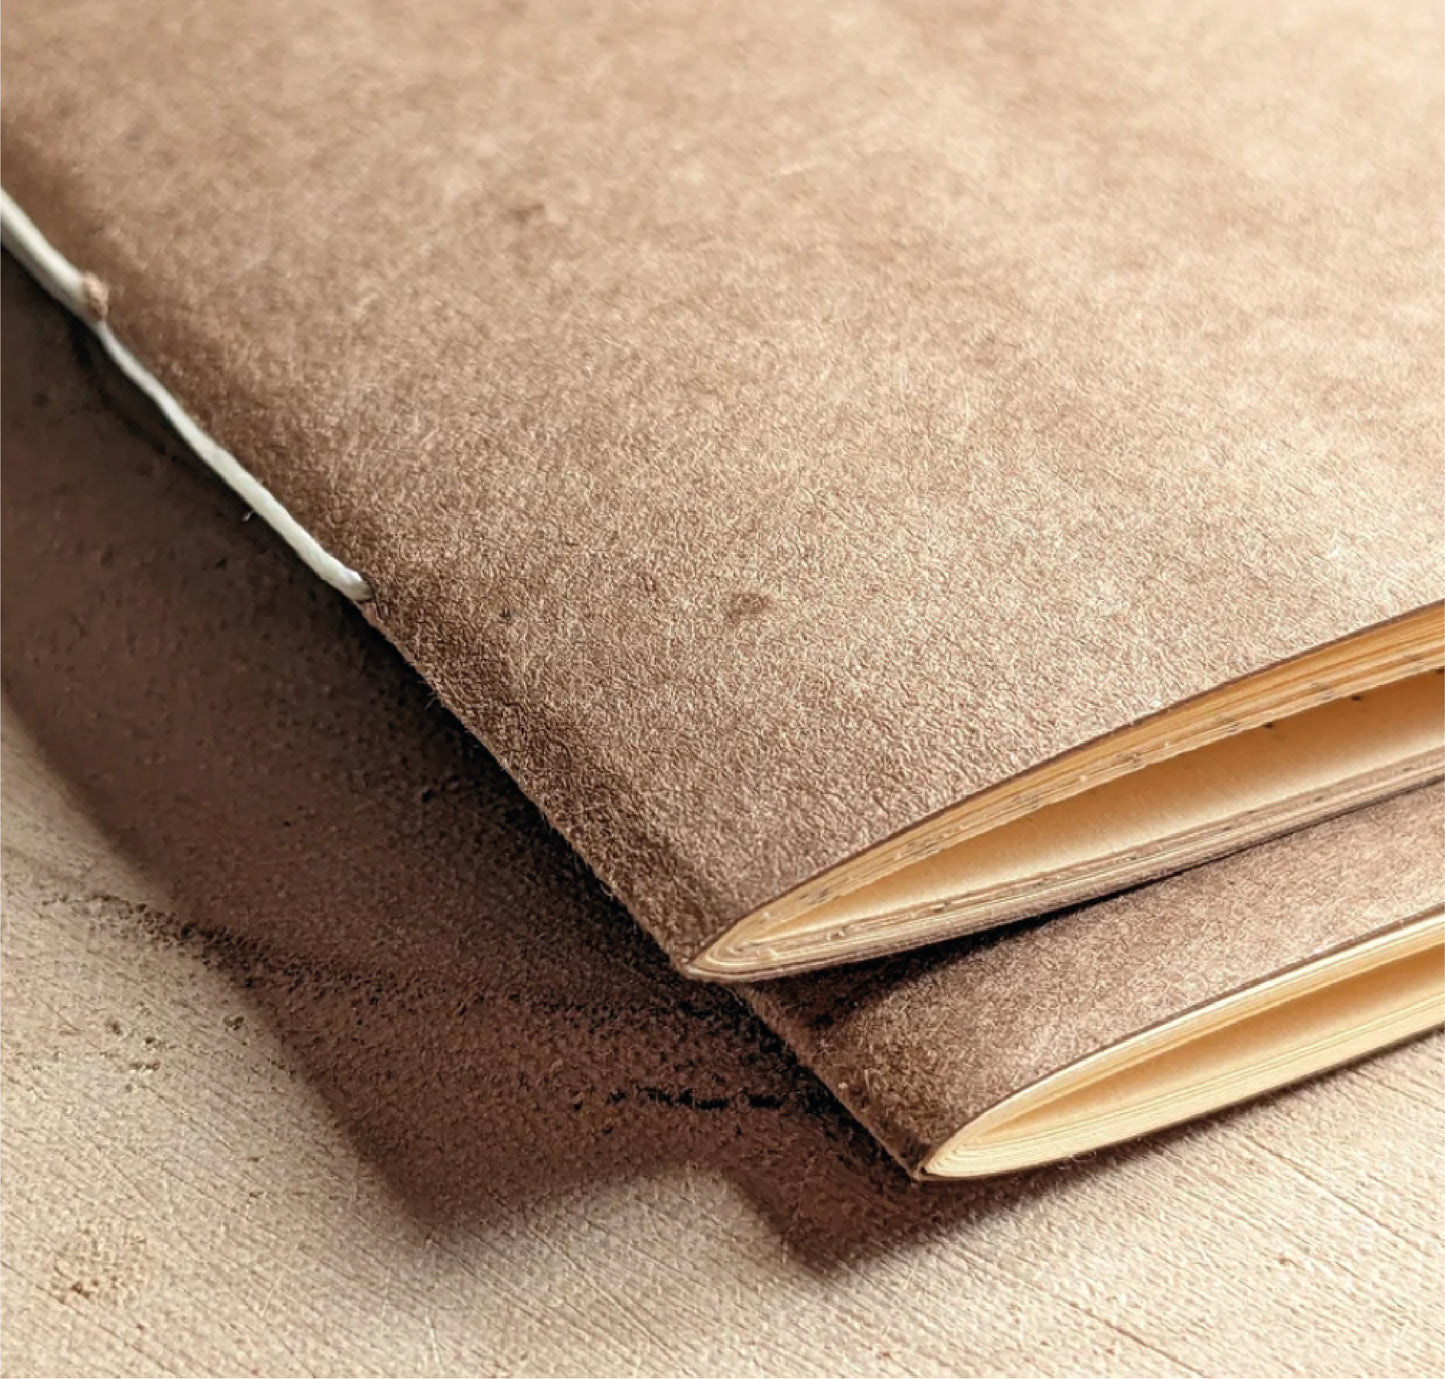 Handsewn Notebook, Light Yellow Paper and Brown Cardstock Cover, 60 Pages